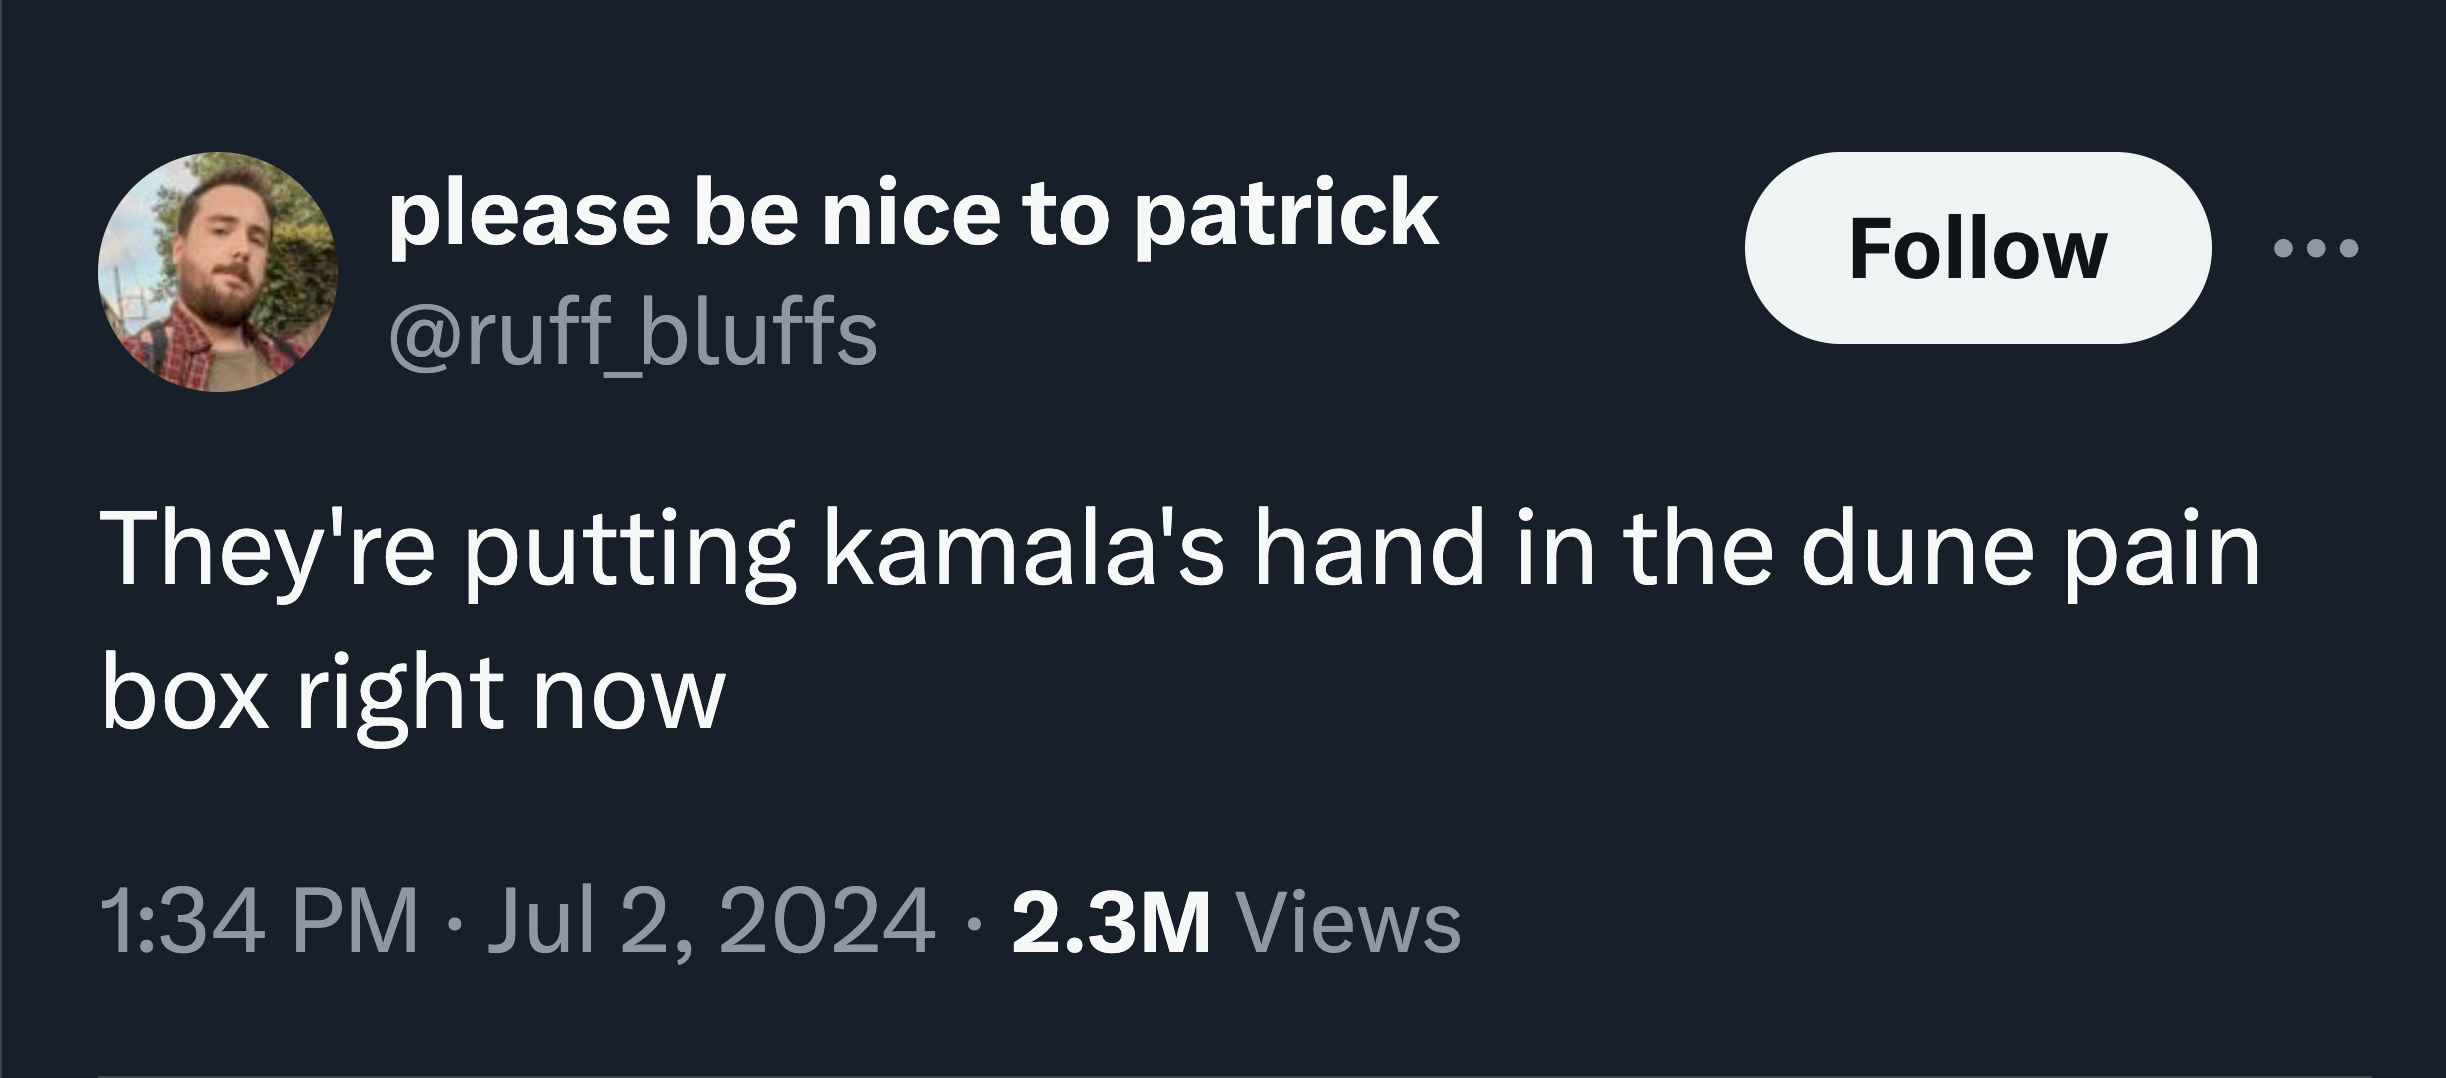 parallel - please be nice to patrick They're putting kamala's hand in the dune pain box right now 2.3M Views .